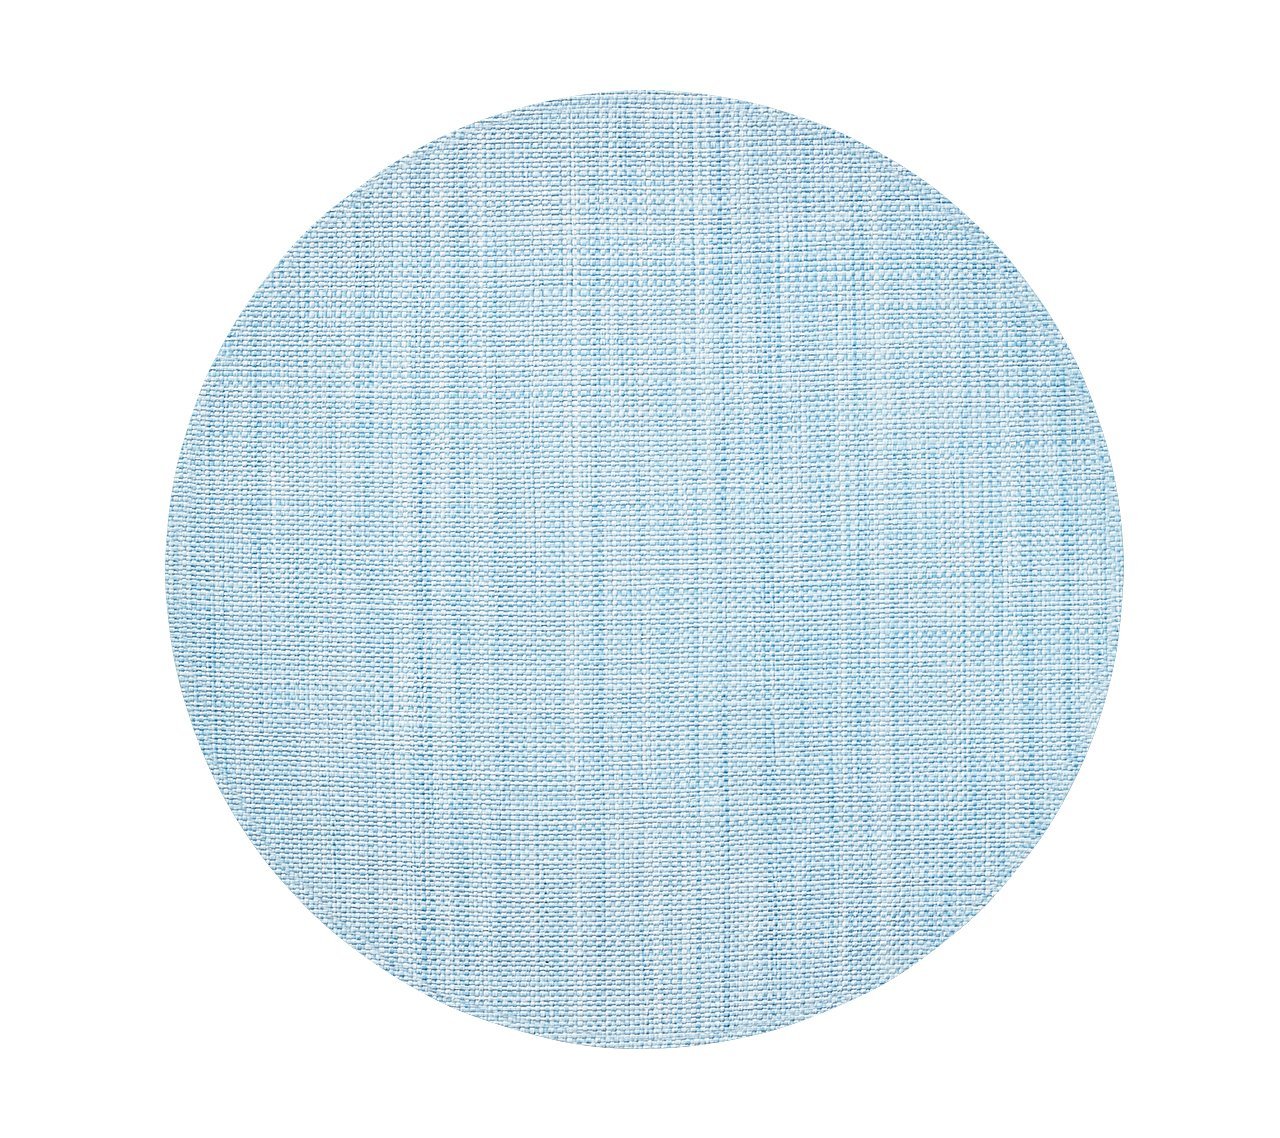 Portofino Placemat in Periwinkle, Set of 4 by Kim Seybert 